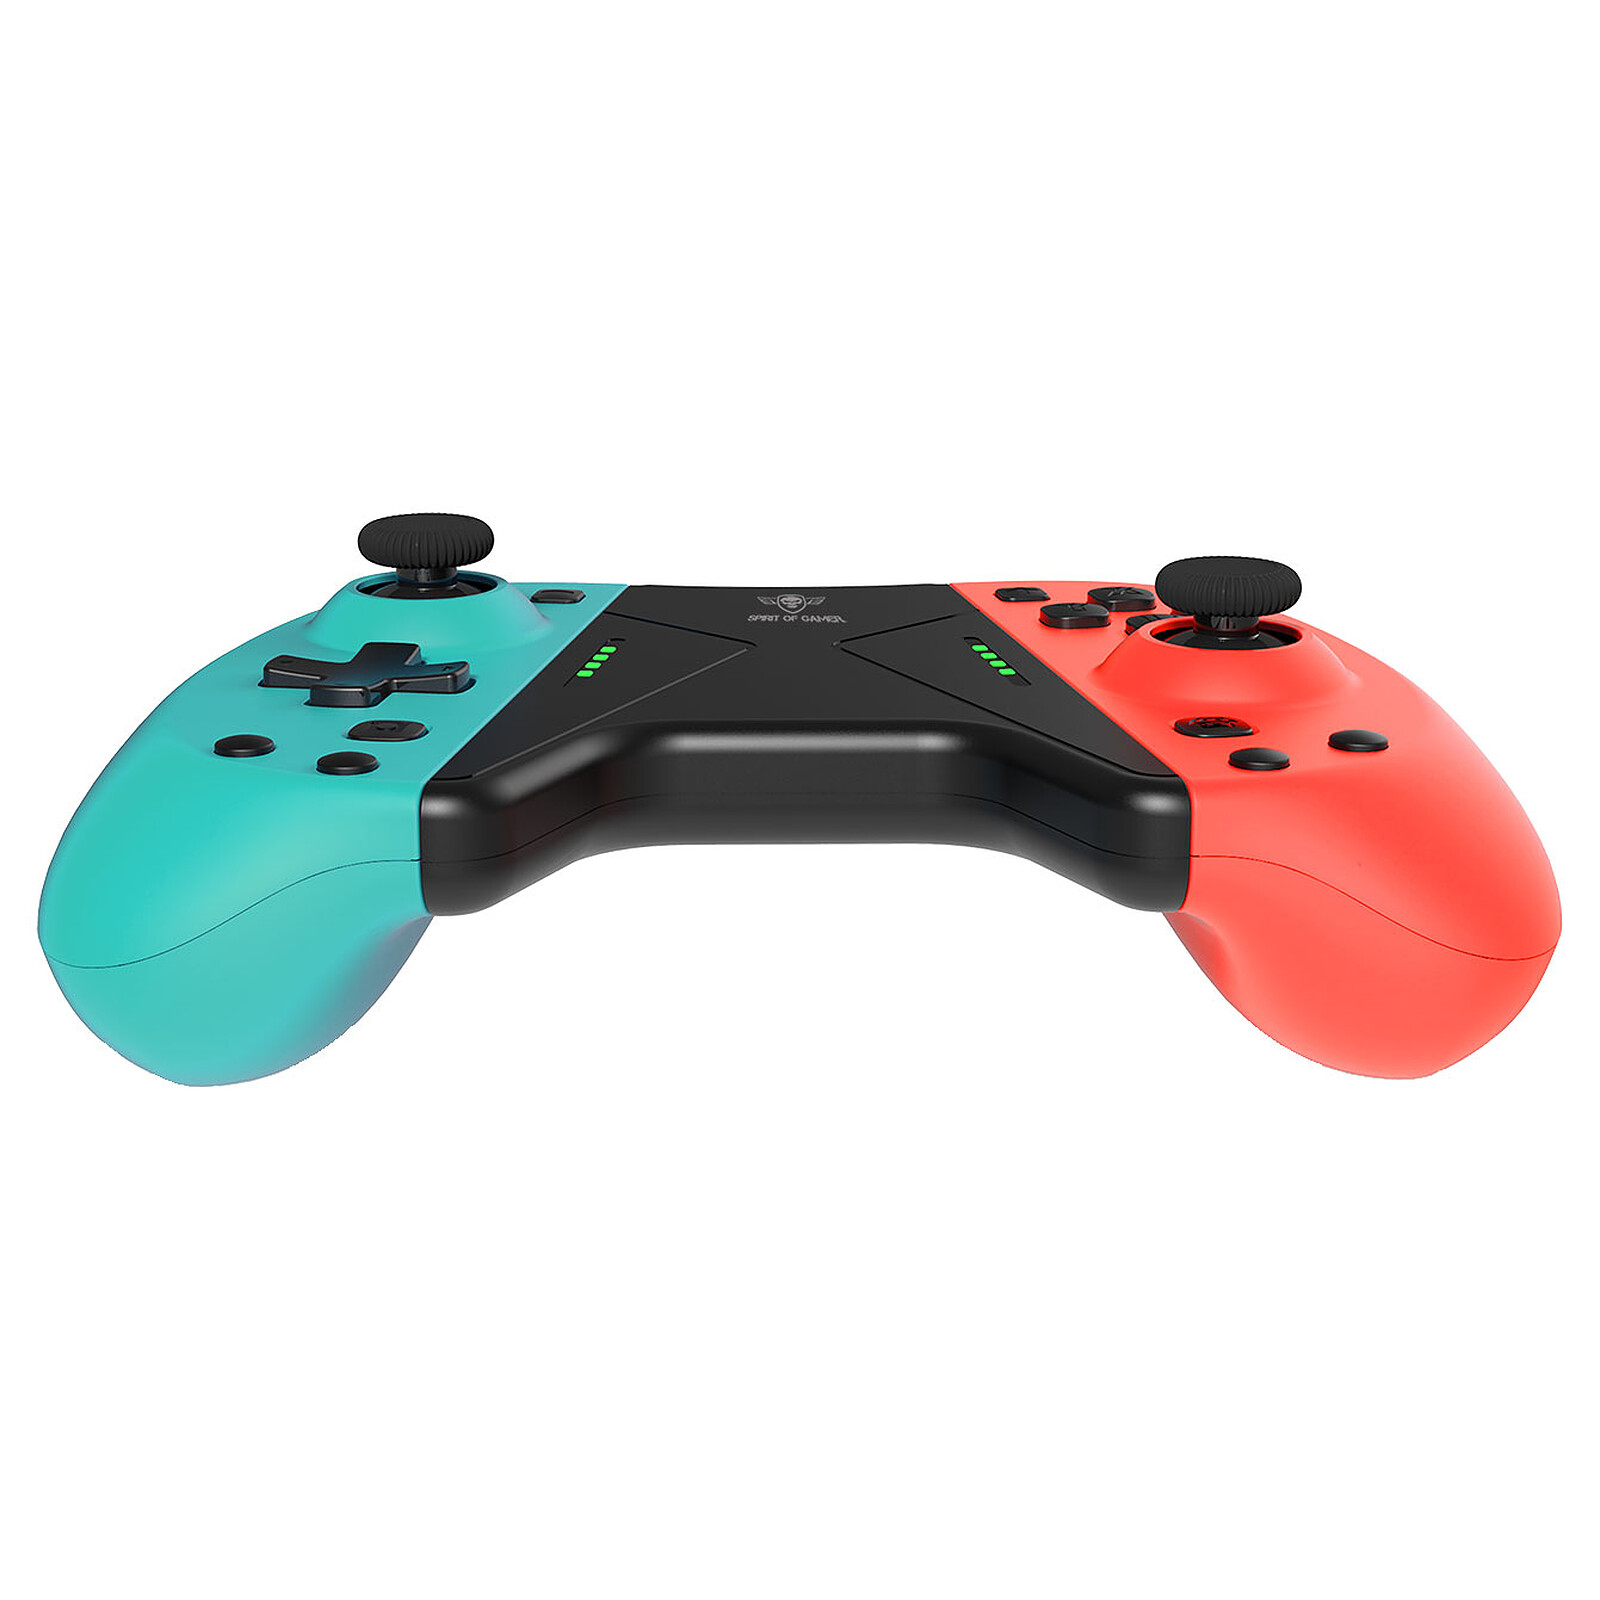 Gaming Manettes Muvit Gaming MANETTE SANS FIL POUR SWITCH